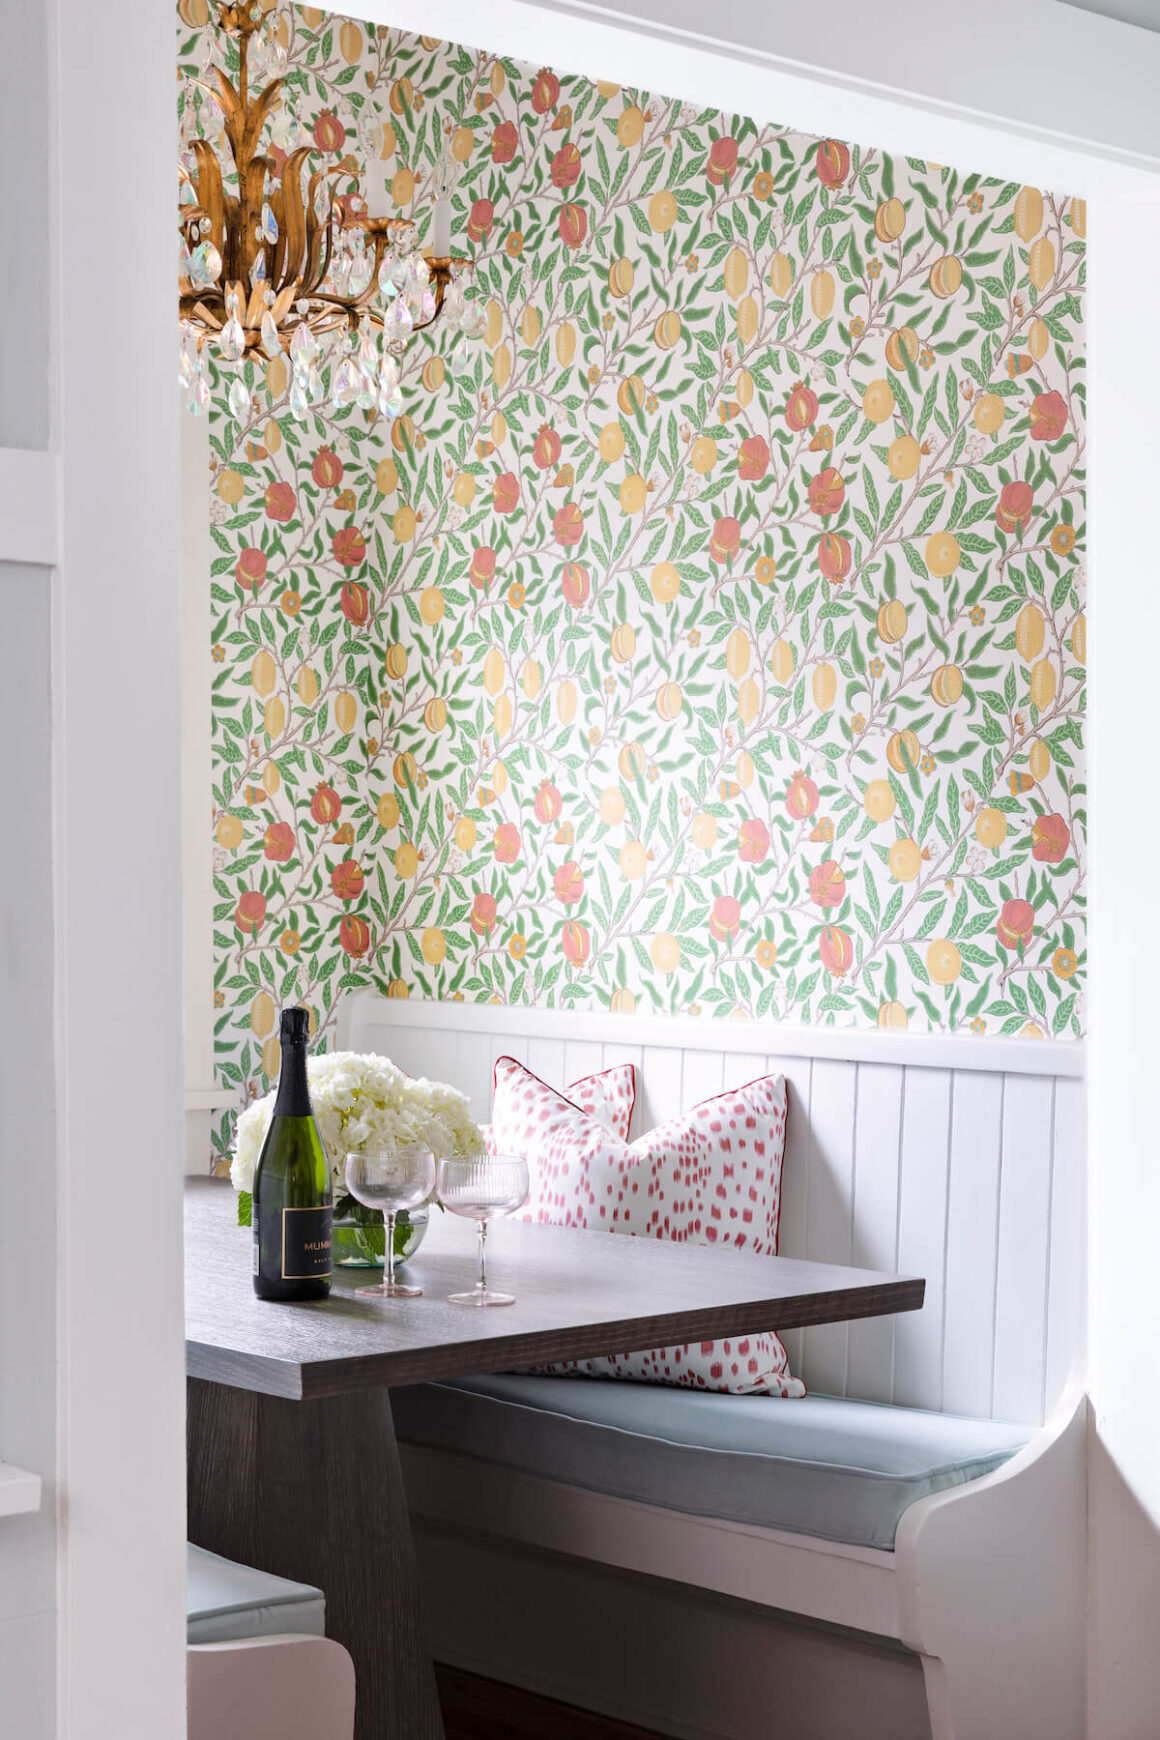 breakfast nook with bright floral wallpaper